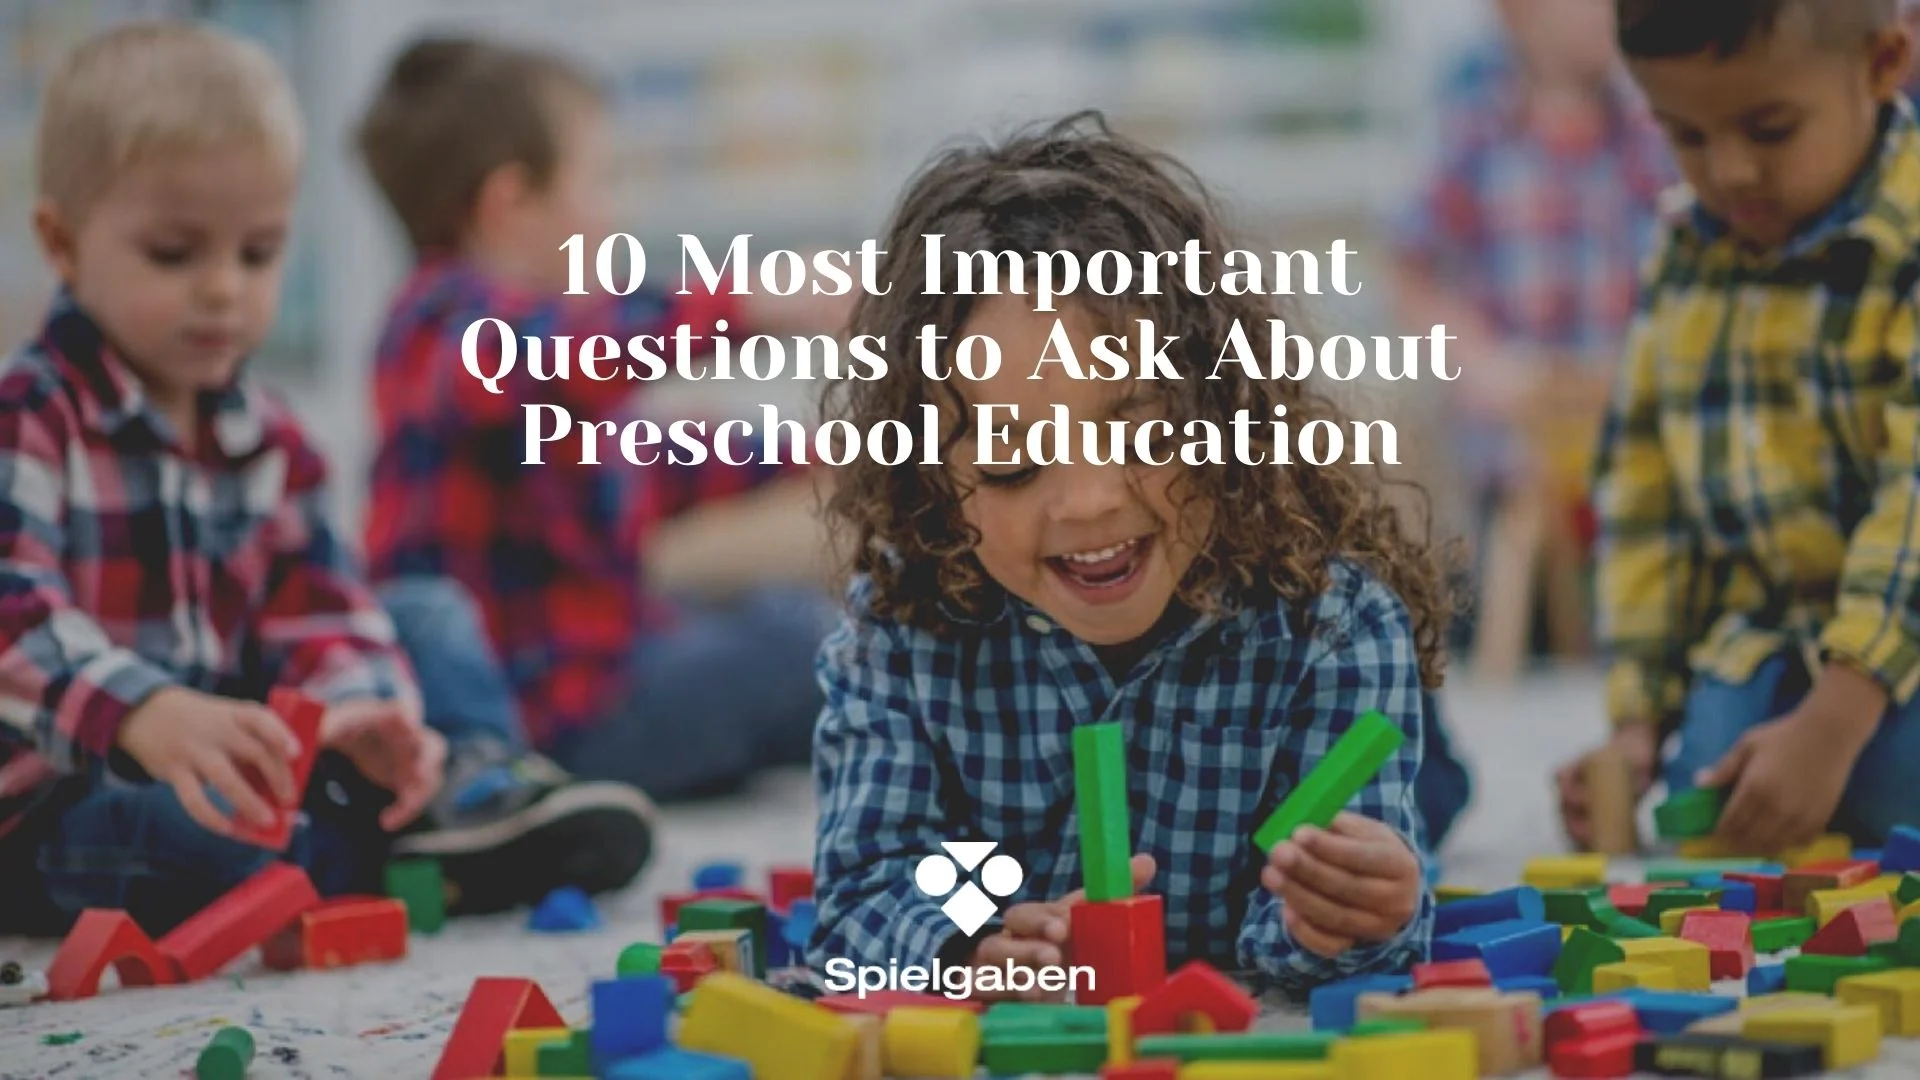 10 Most Important Questions to Ask About Preschool Education